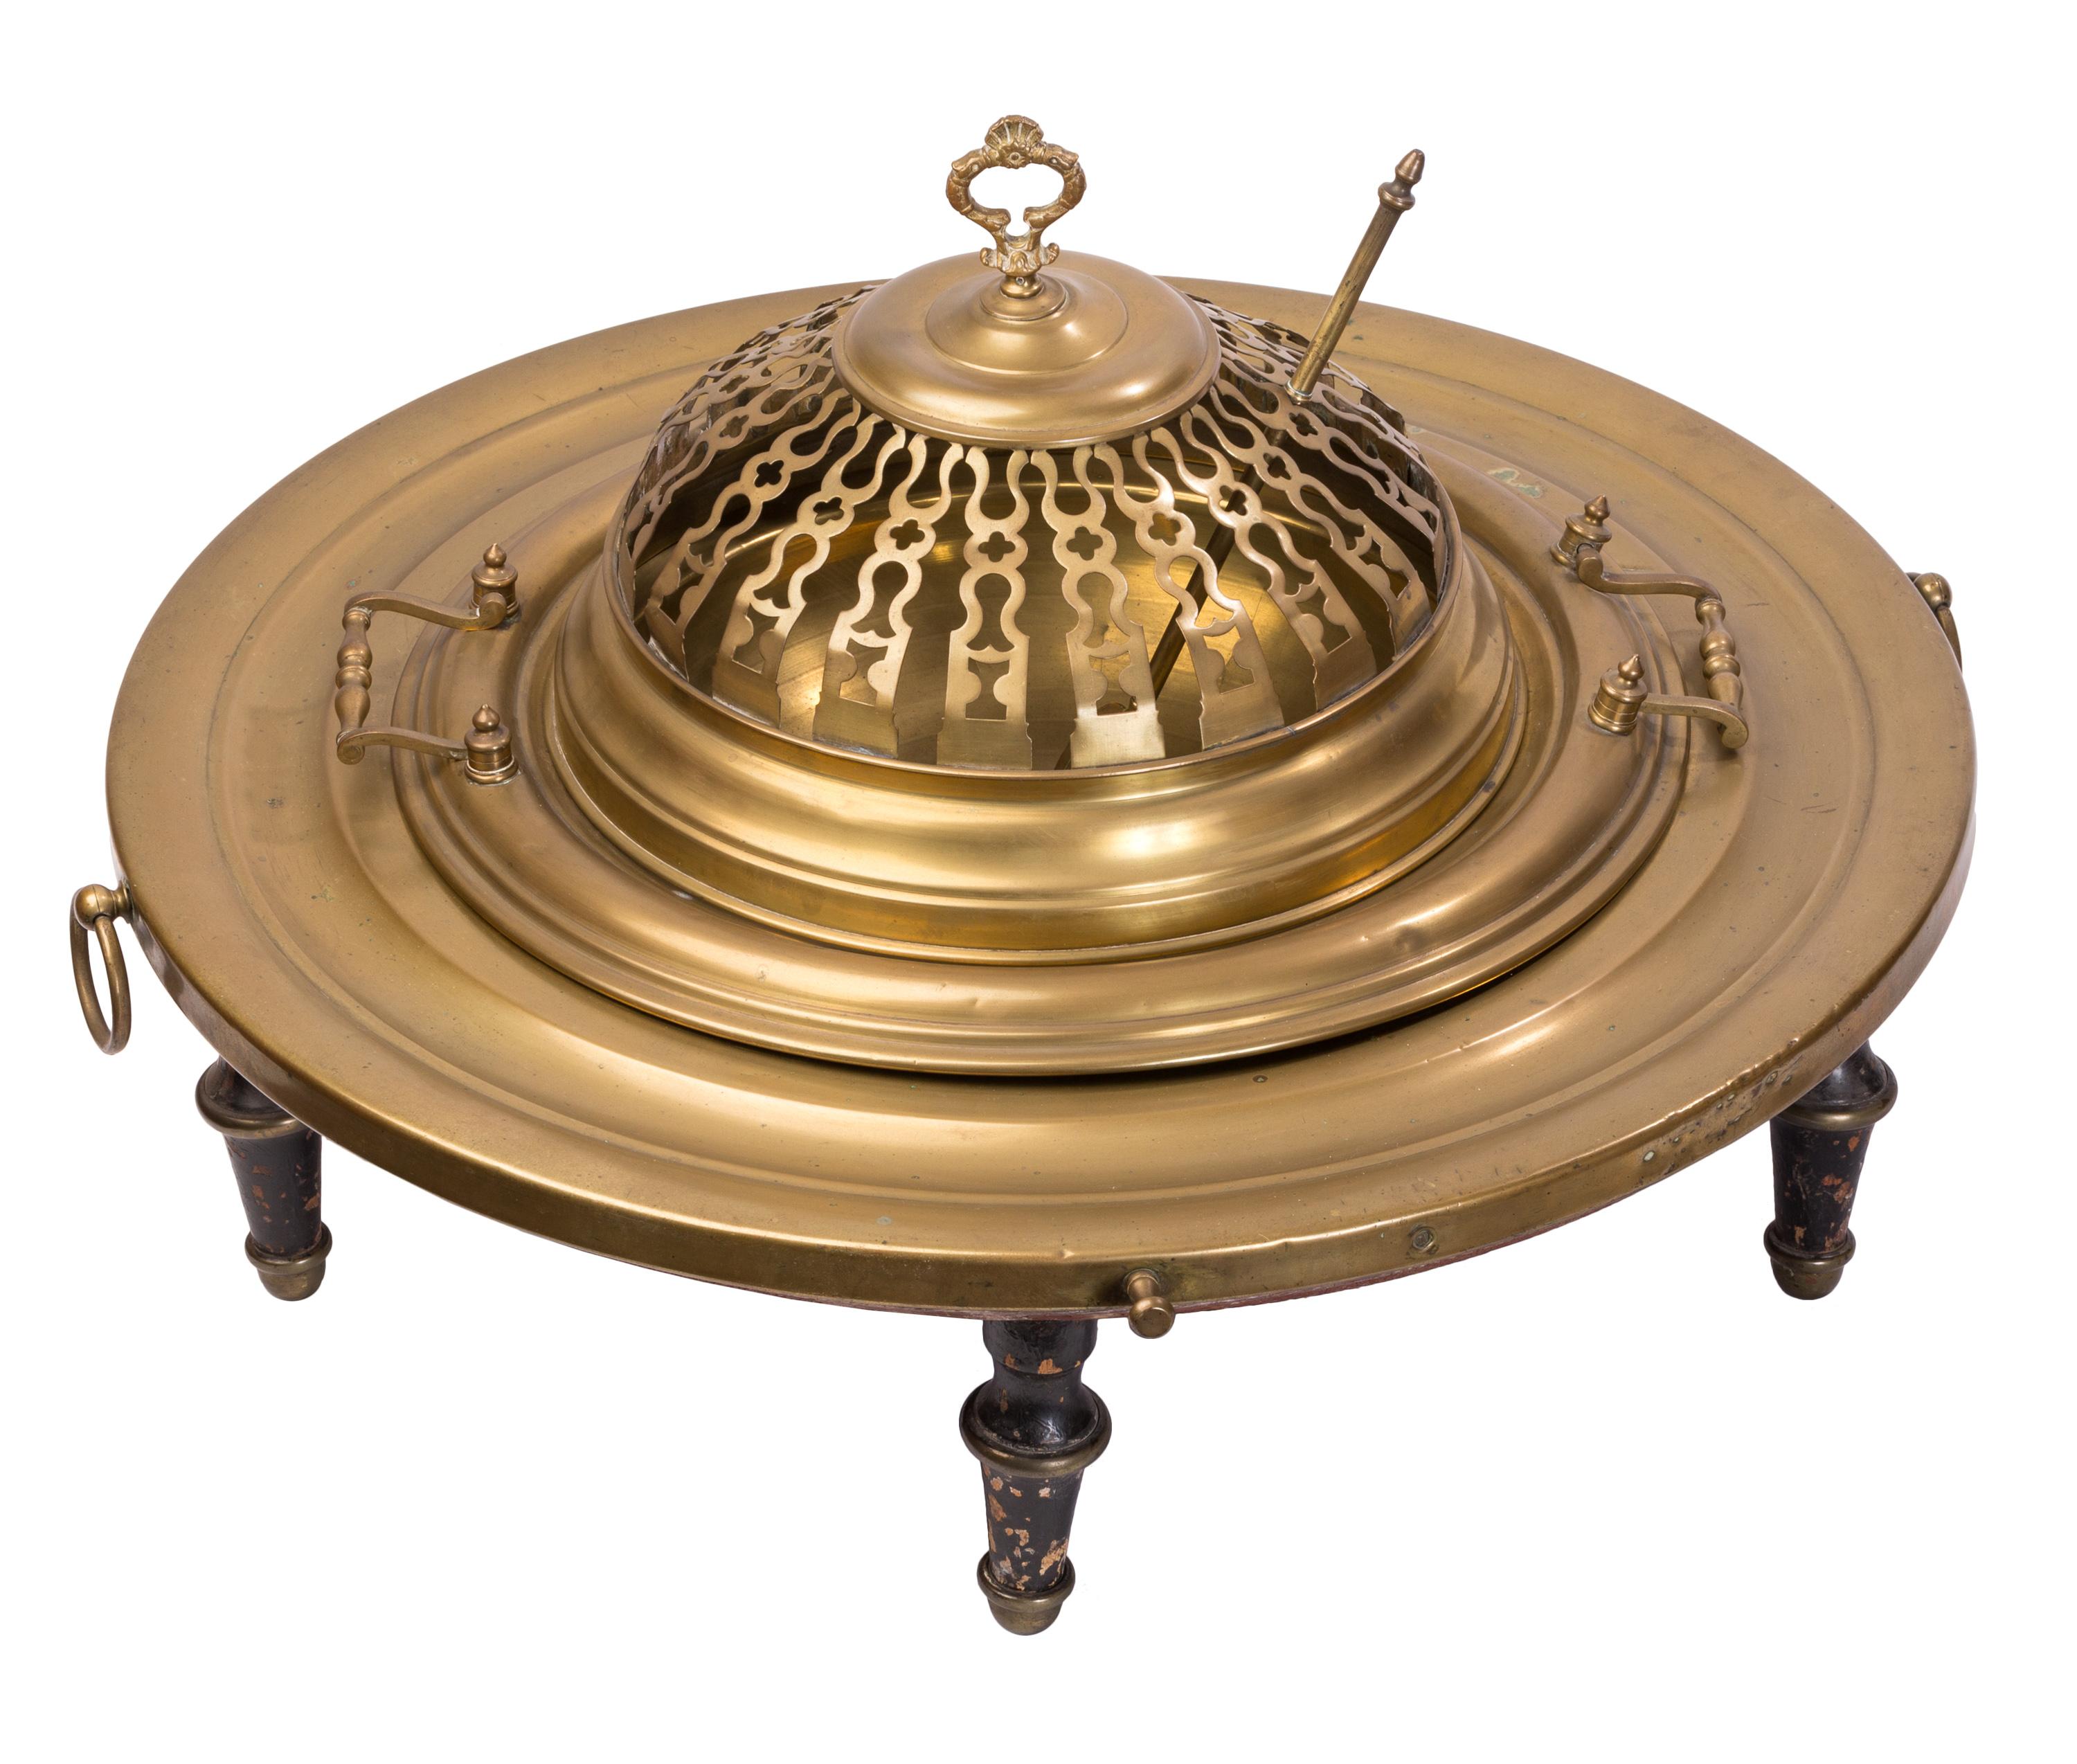 This 19th century Spanish brazier, or 